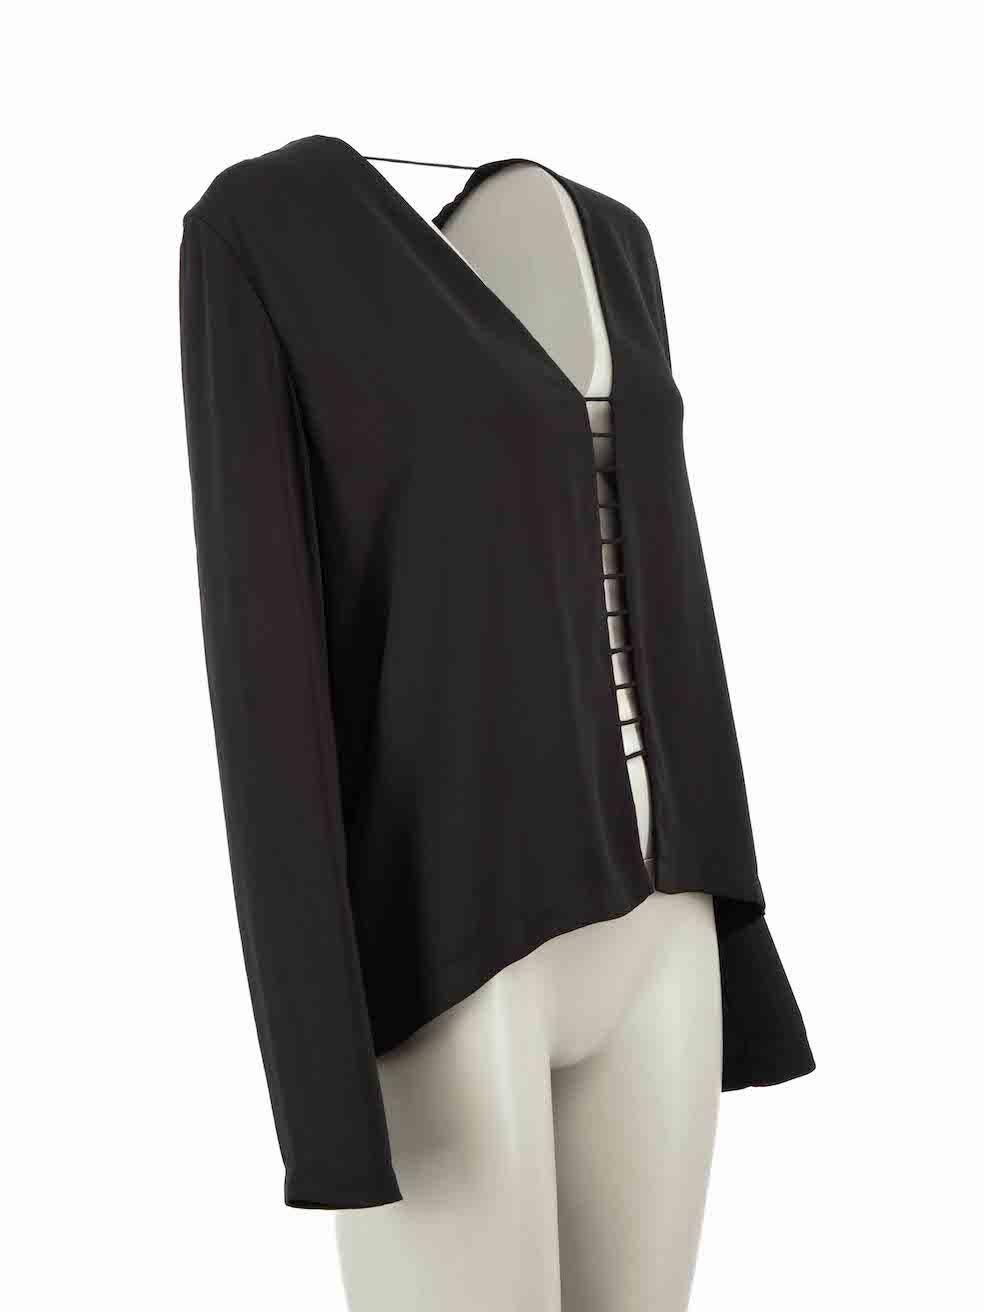 CONDITION is Very good. Hardly any visible wear to blouse is evident on this used Dion Lee designer resale item.
 
Details
Black
Polyester
Blouse
Long sleeves
Round neck
Open back
Back ladder detail
Button up fastening

Made in China
